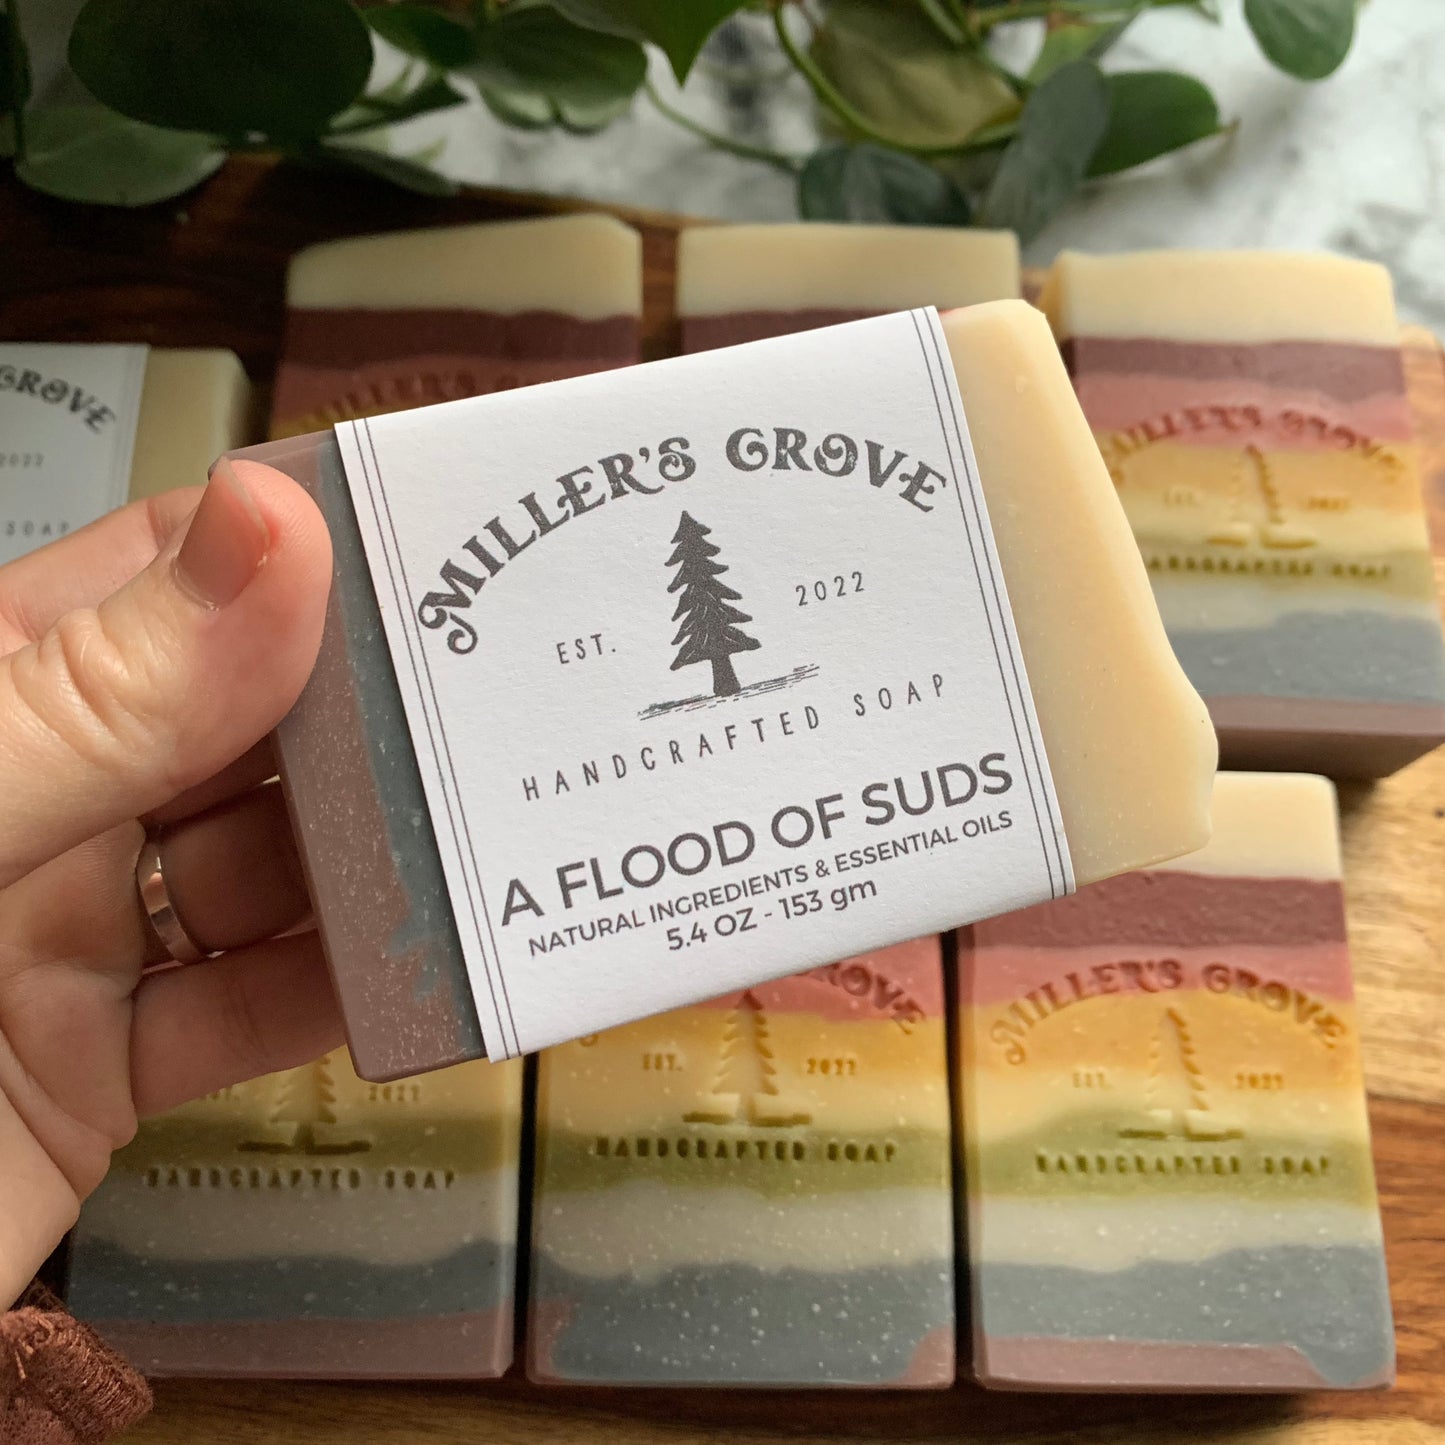 rainbow colored soap bars named "A Flood of Suds" 